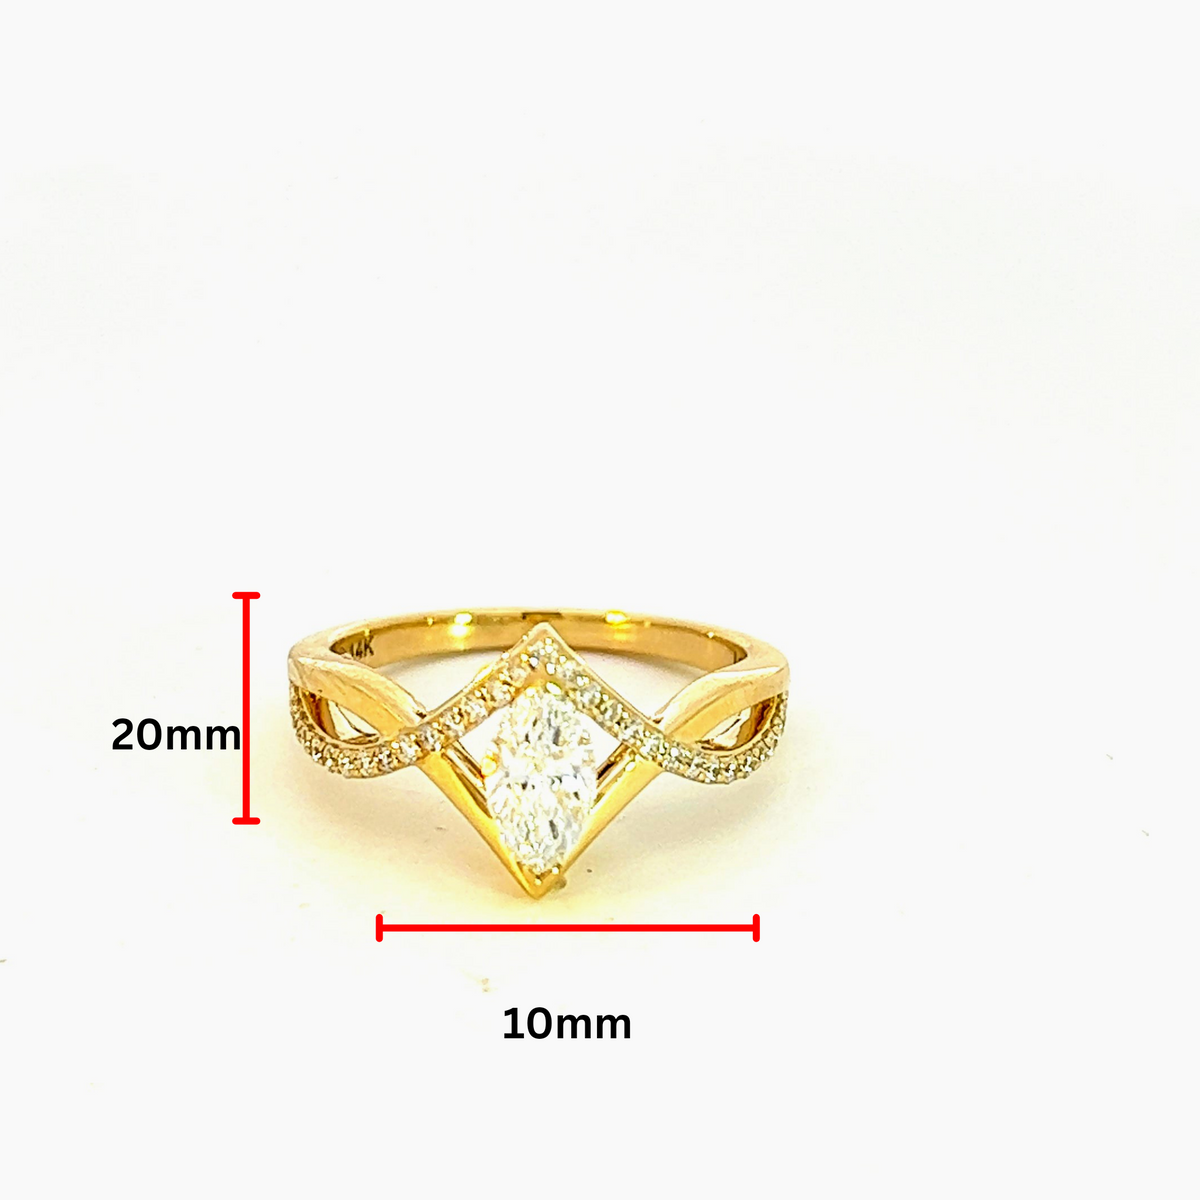 14K Yellow Gold 0.76cttw Marquise Cut Lab Grown Diamond Ring, Size 6